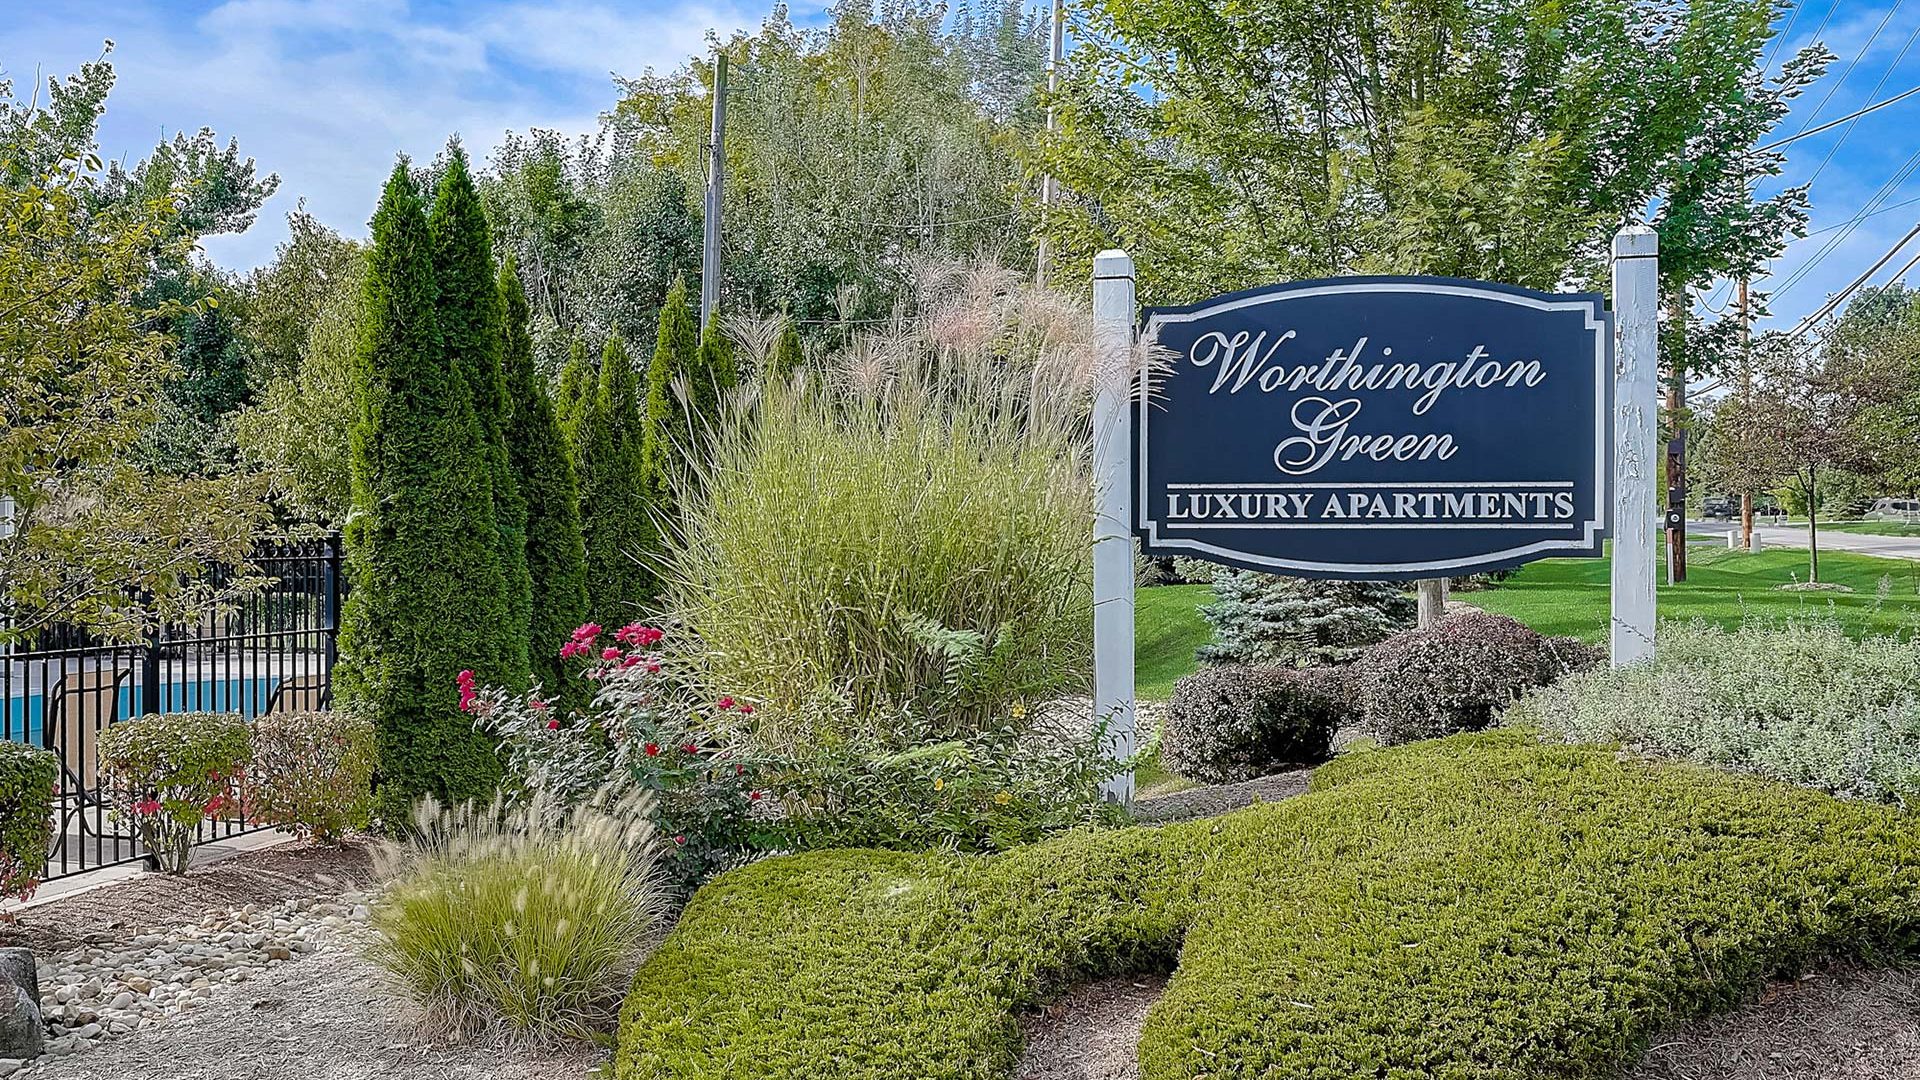 the sign for washington village apartments at The Worthington Green